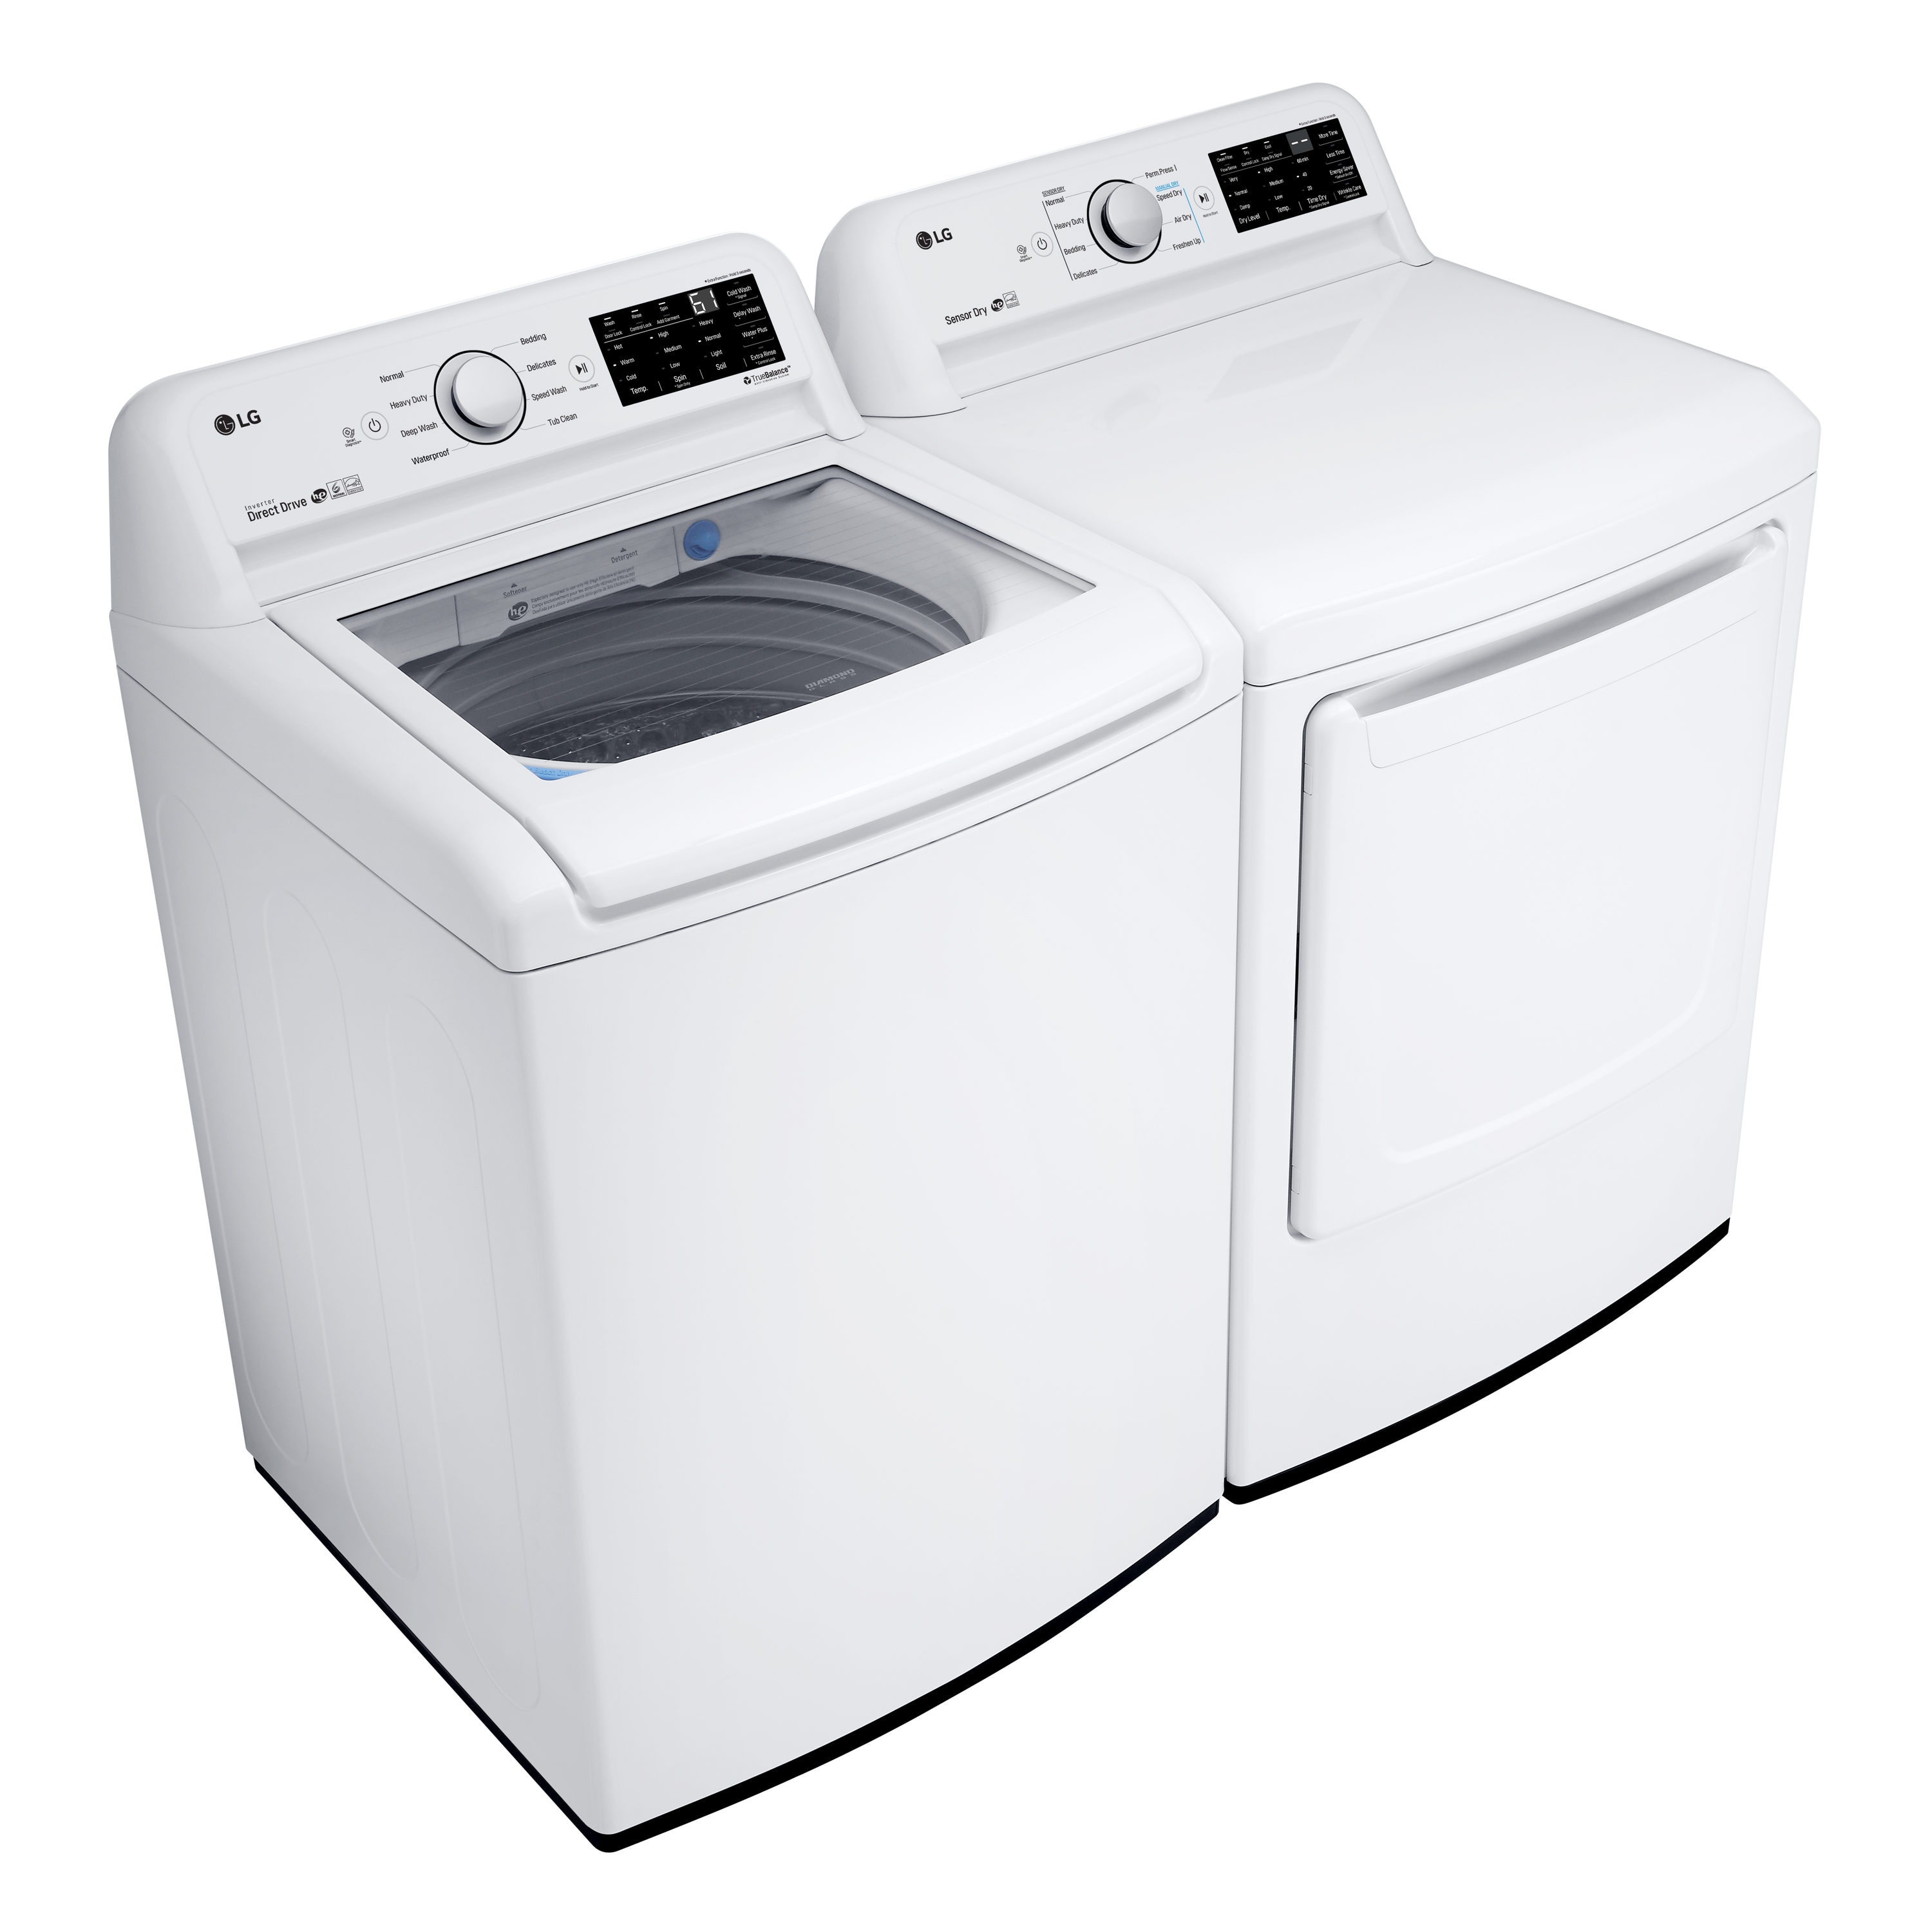 sold-out-27-lg-dlg7101w-7-3-cu-ft-front-load-gas-dryer-appliances